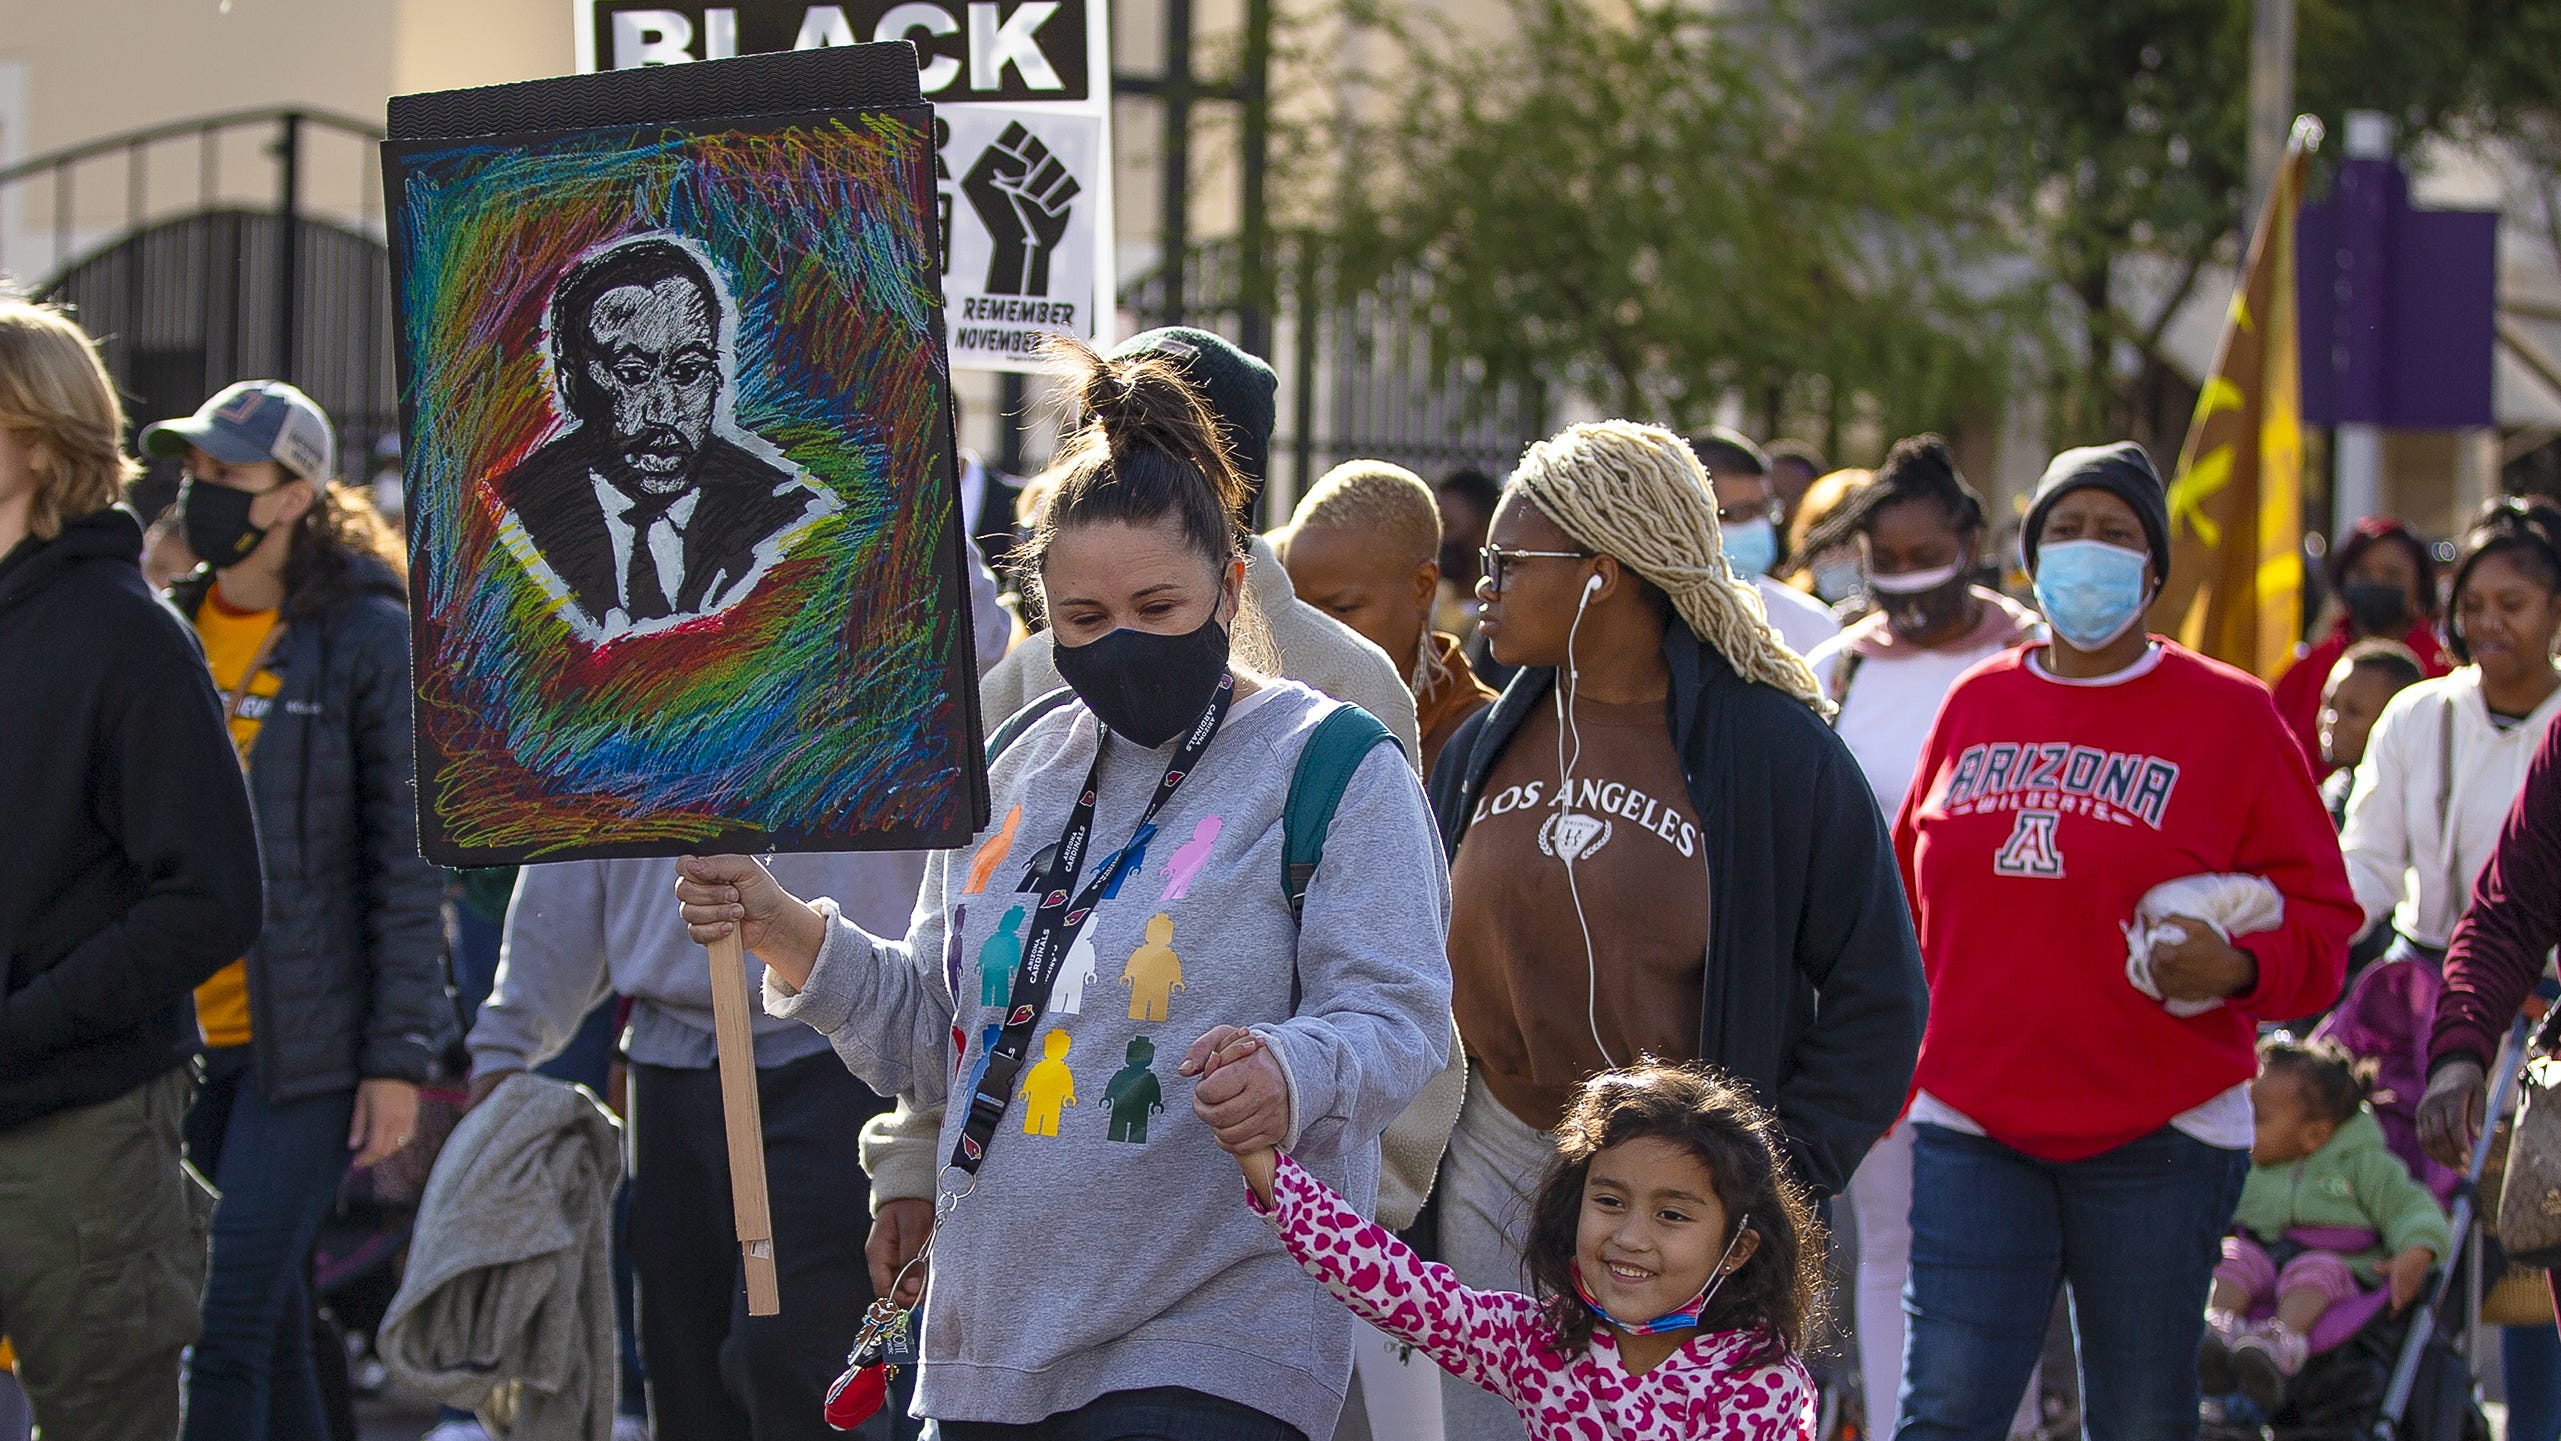 MLK Day 2023 events in Phoenix 9 festivals, marches and a parade